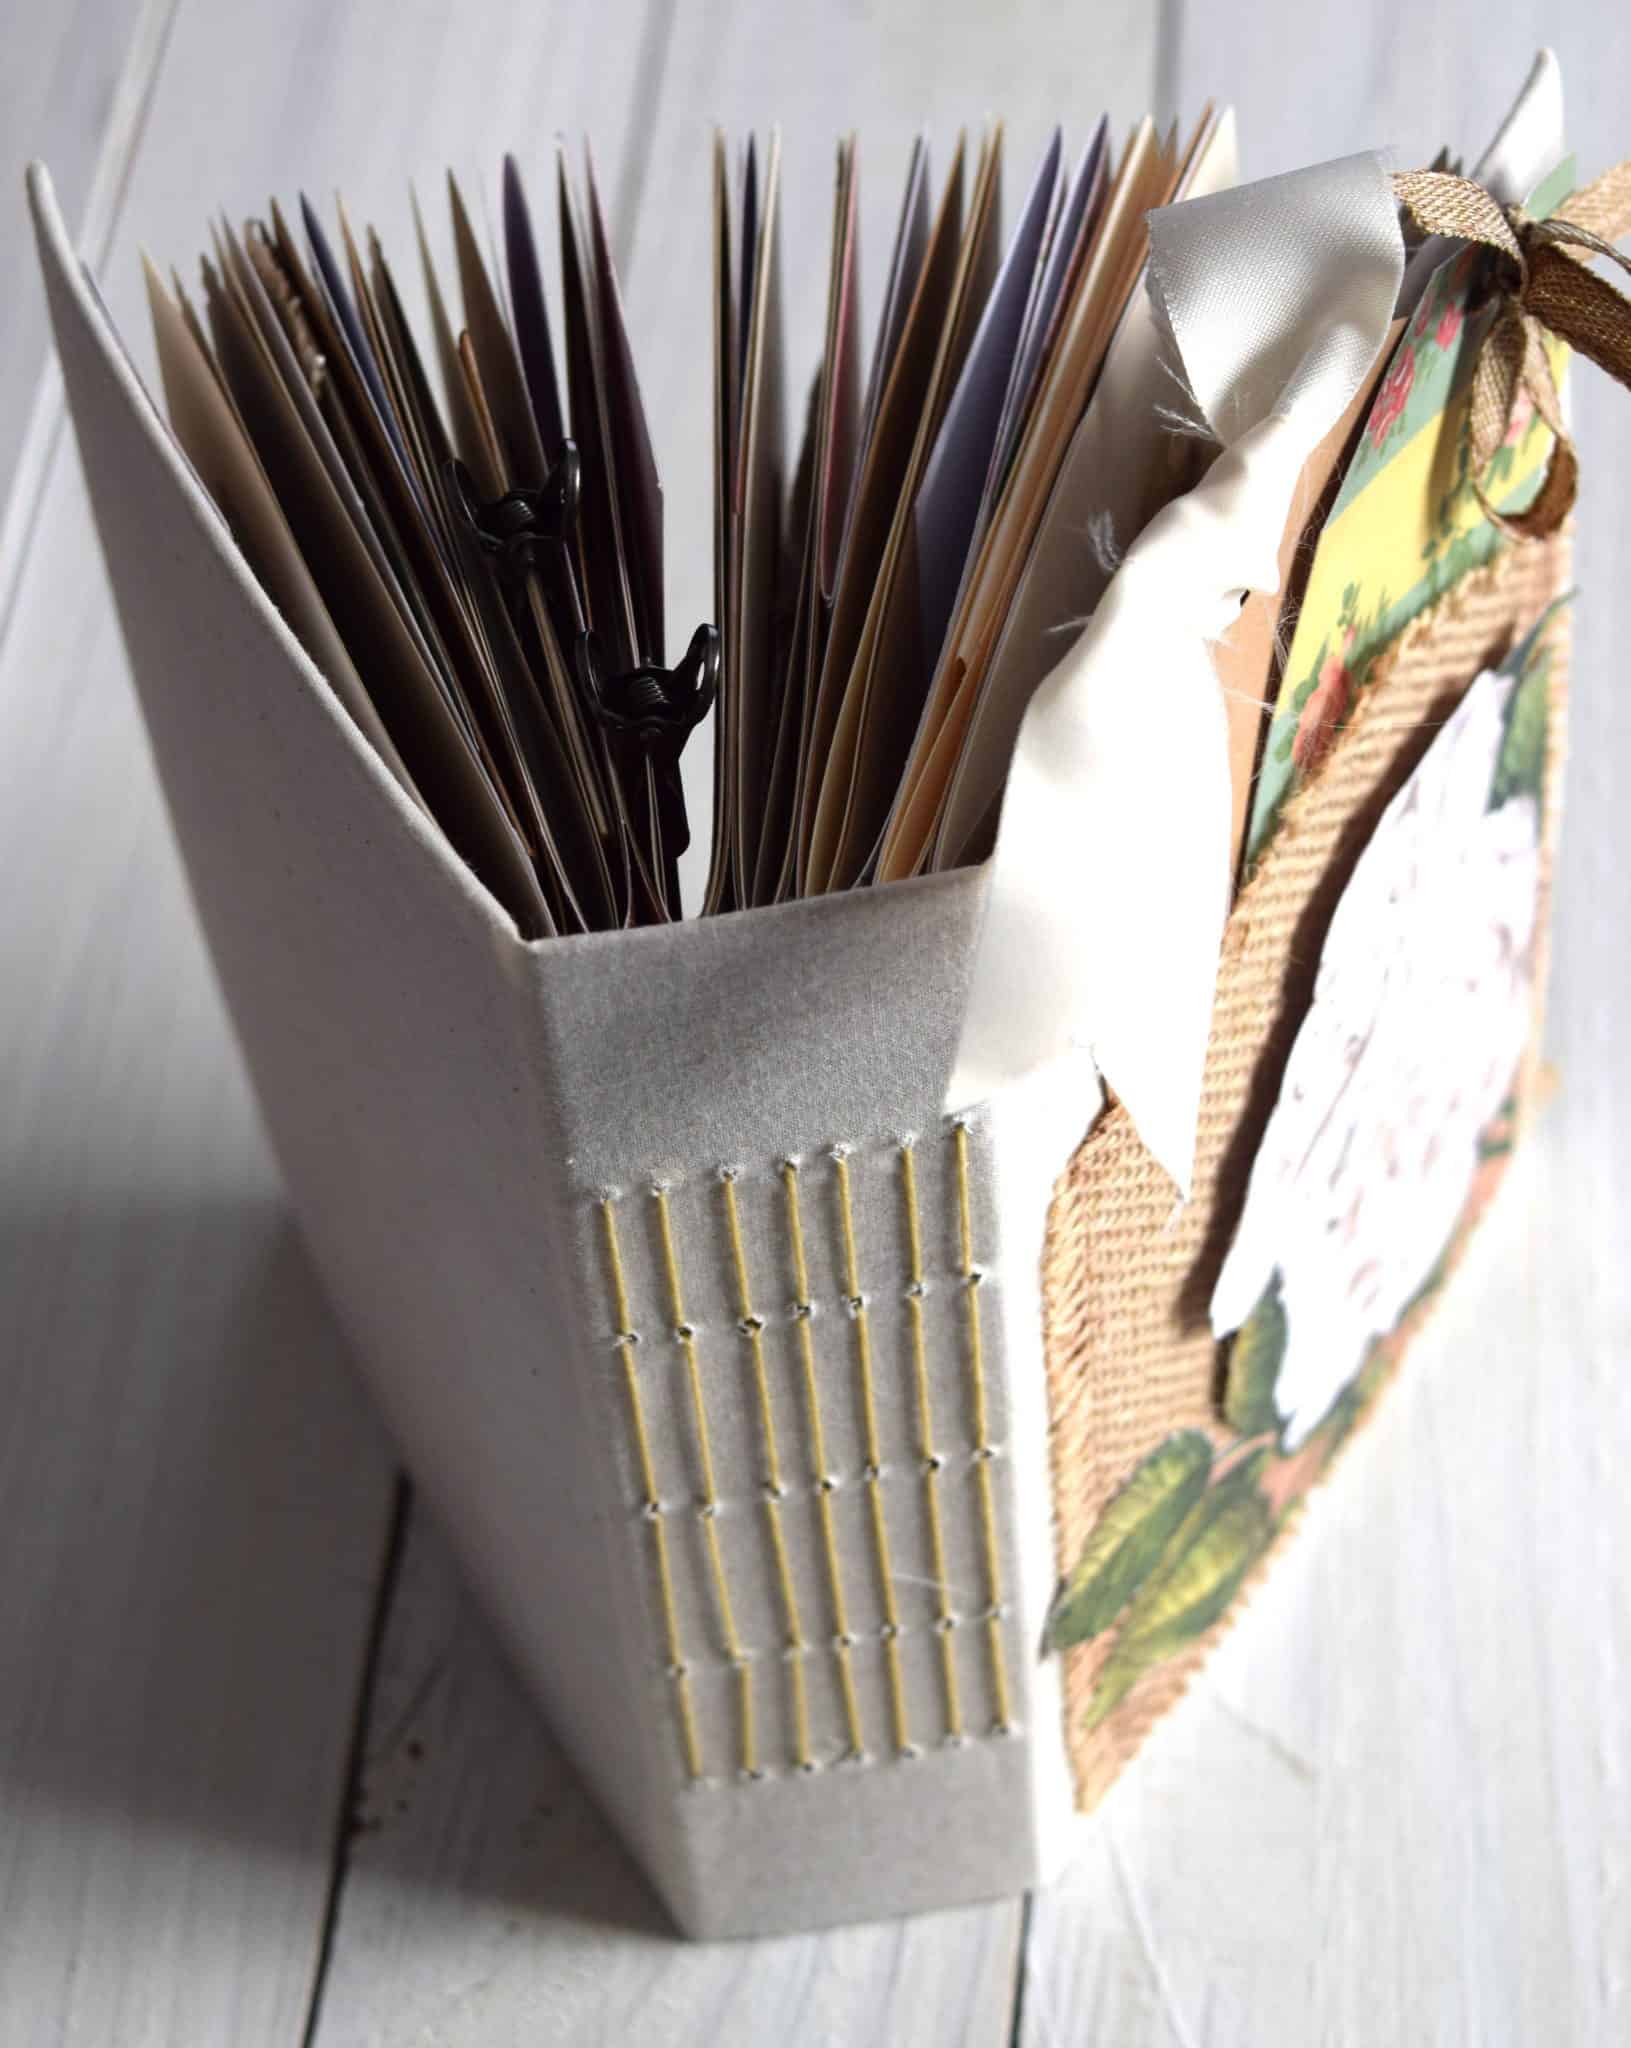 How to Make Paper from Old Scrap Paper: 15 Steps (with Pictures)